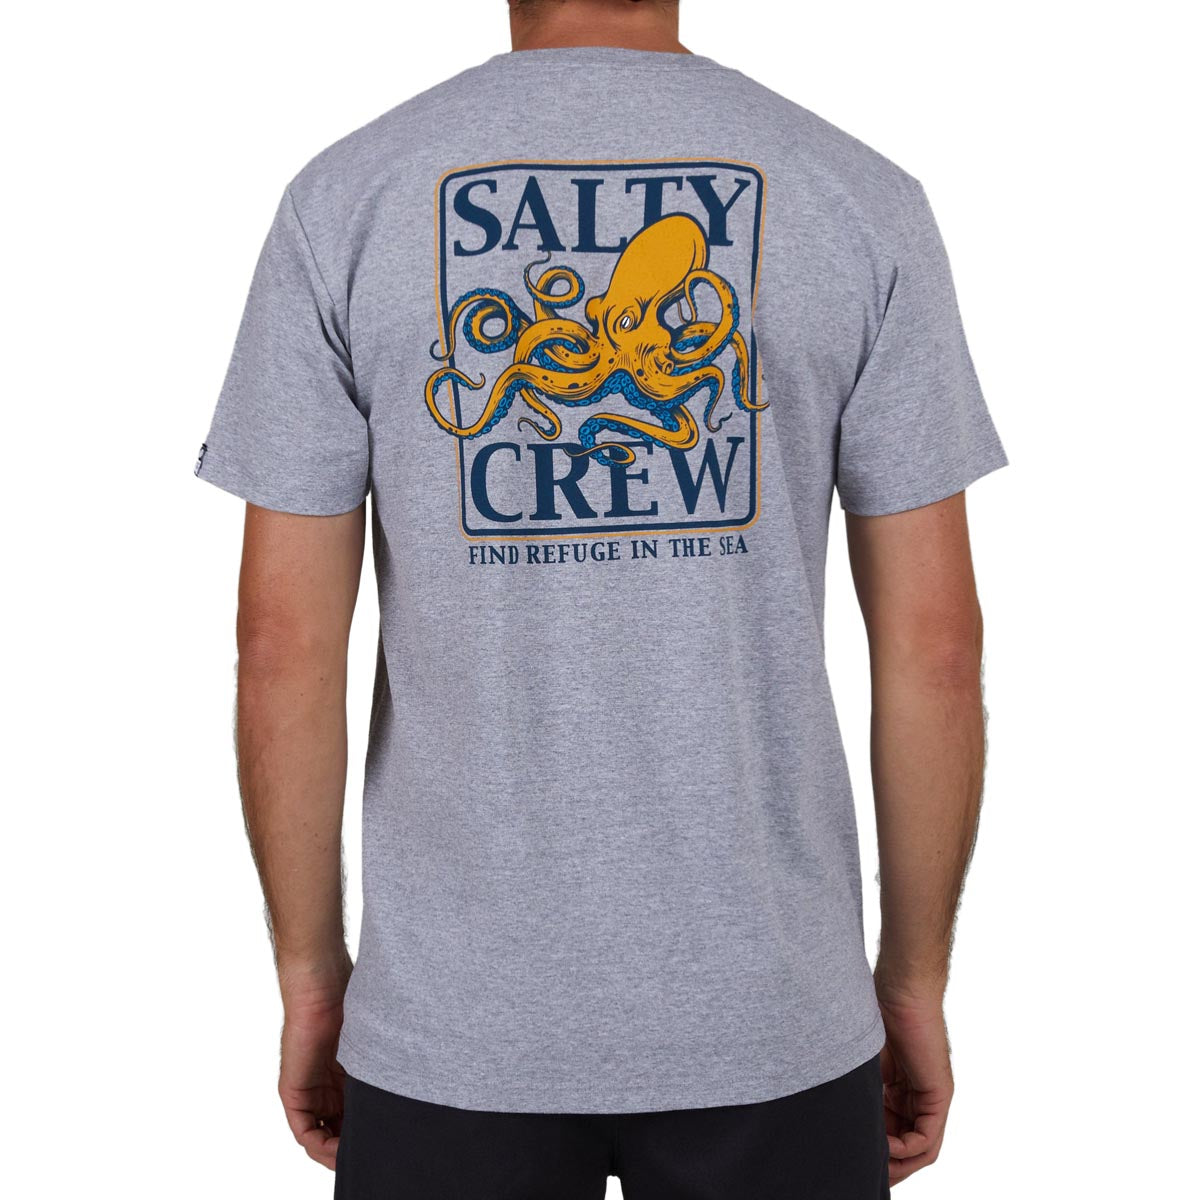 Salty Crew Ink Slinger Classic T-Shirt - Athletic Heather image 2